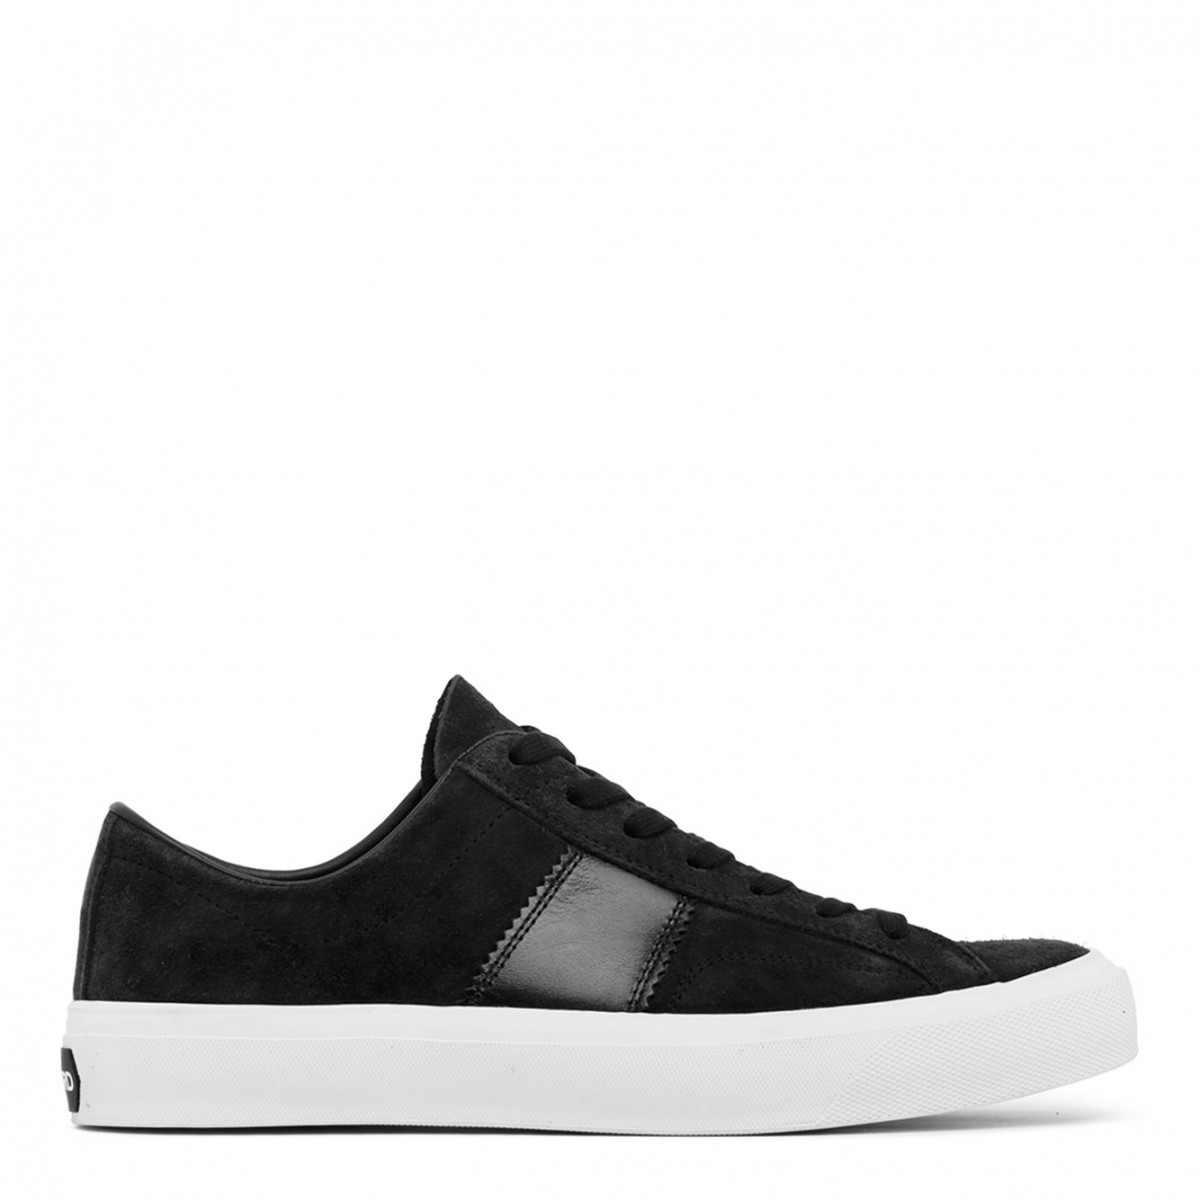 Tom Ford Black and Cream Calf Suede and Calf Leather Logo Patch Sneakers.